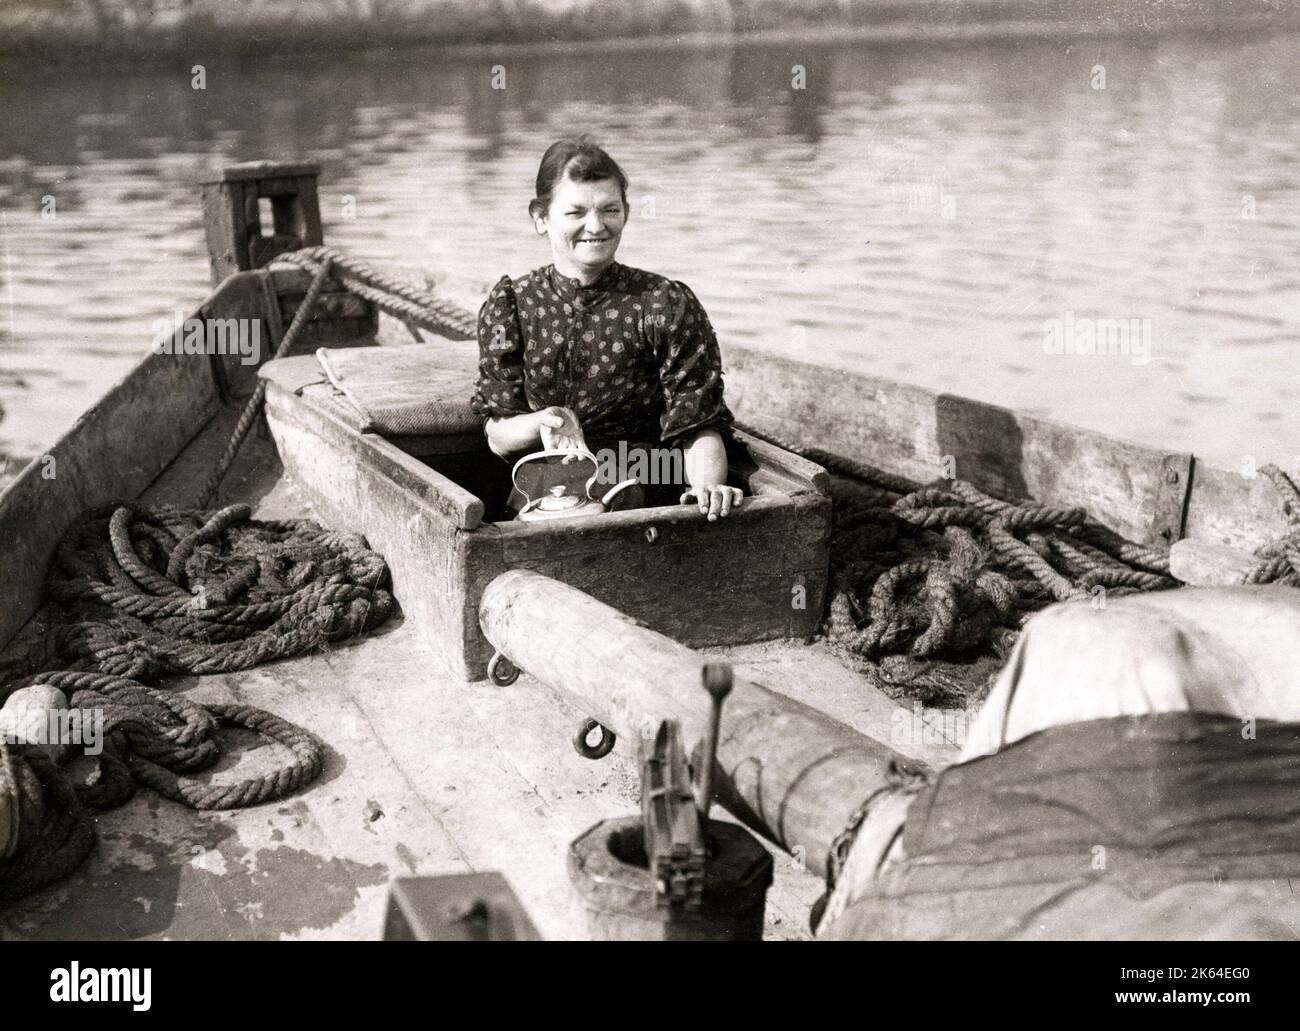 Early 20th century vintage press photograph - family life on board a boat, social history, poverty, England, 1920s - smiling woman boiling a kettle Stock Photo